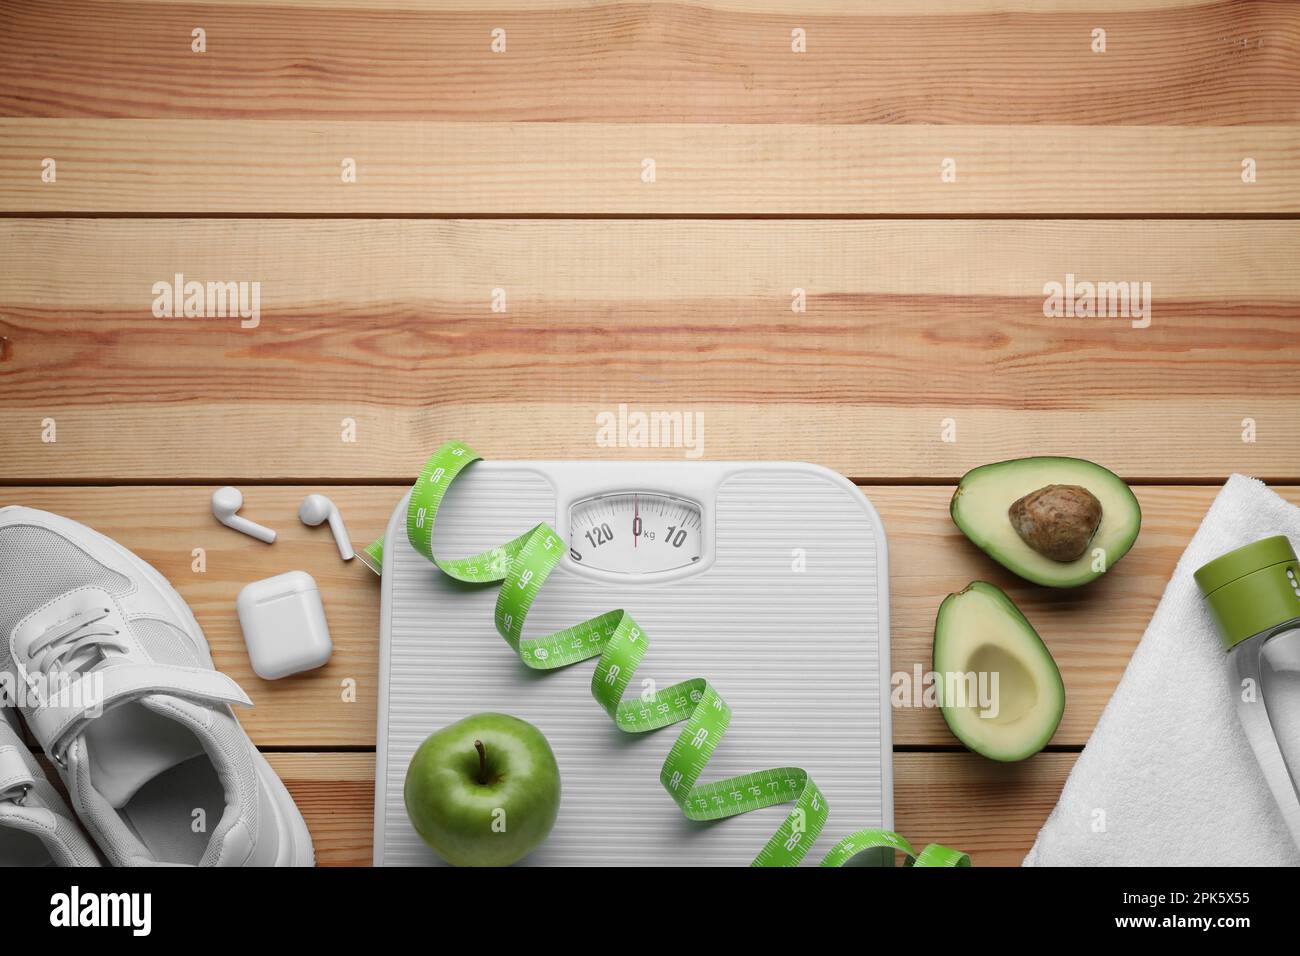 https://c8.alamy.com/comp/2PK5X55/flat-lay-composition-with-bathroom-scale-and-measuring-tape-on-wooden-floor-space-for-text-weight-loss-concept-2PK5X55.jpg